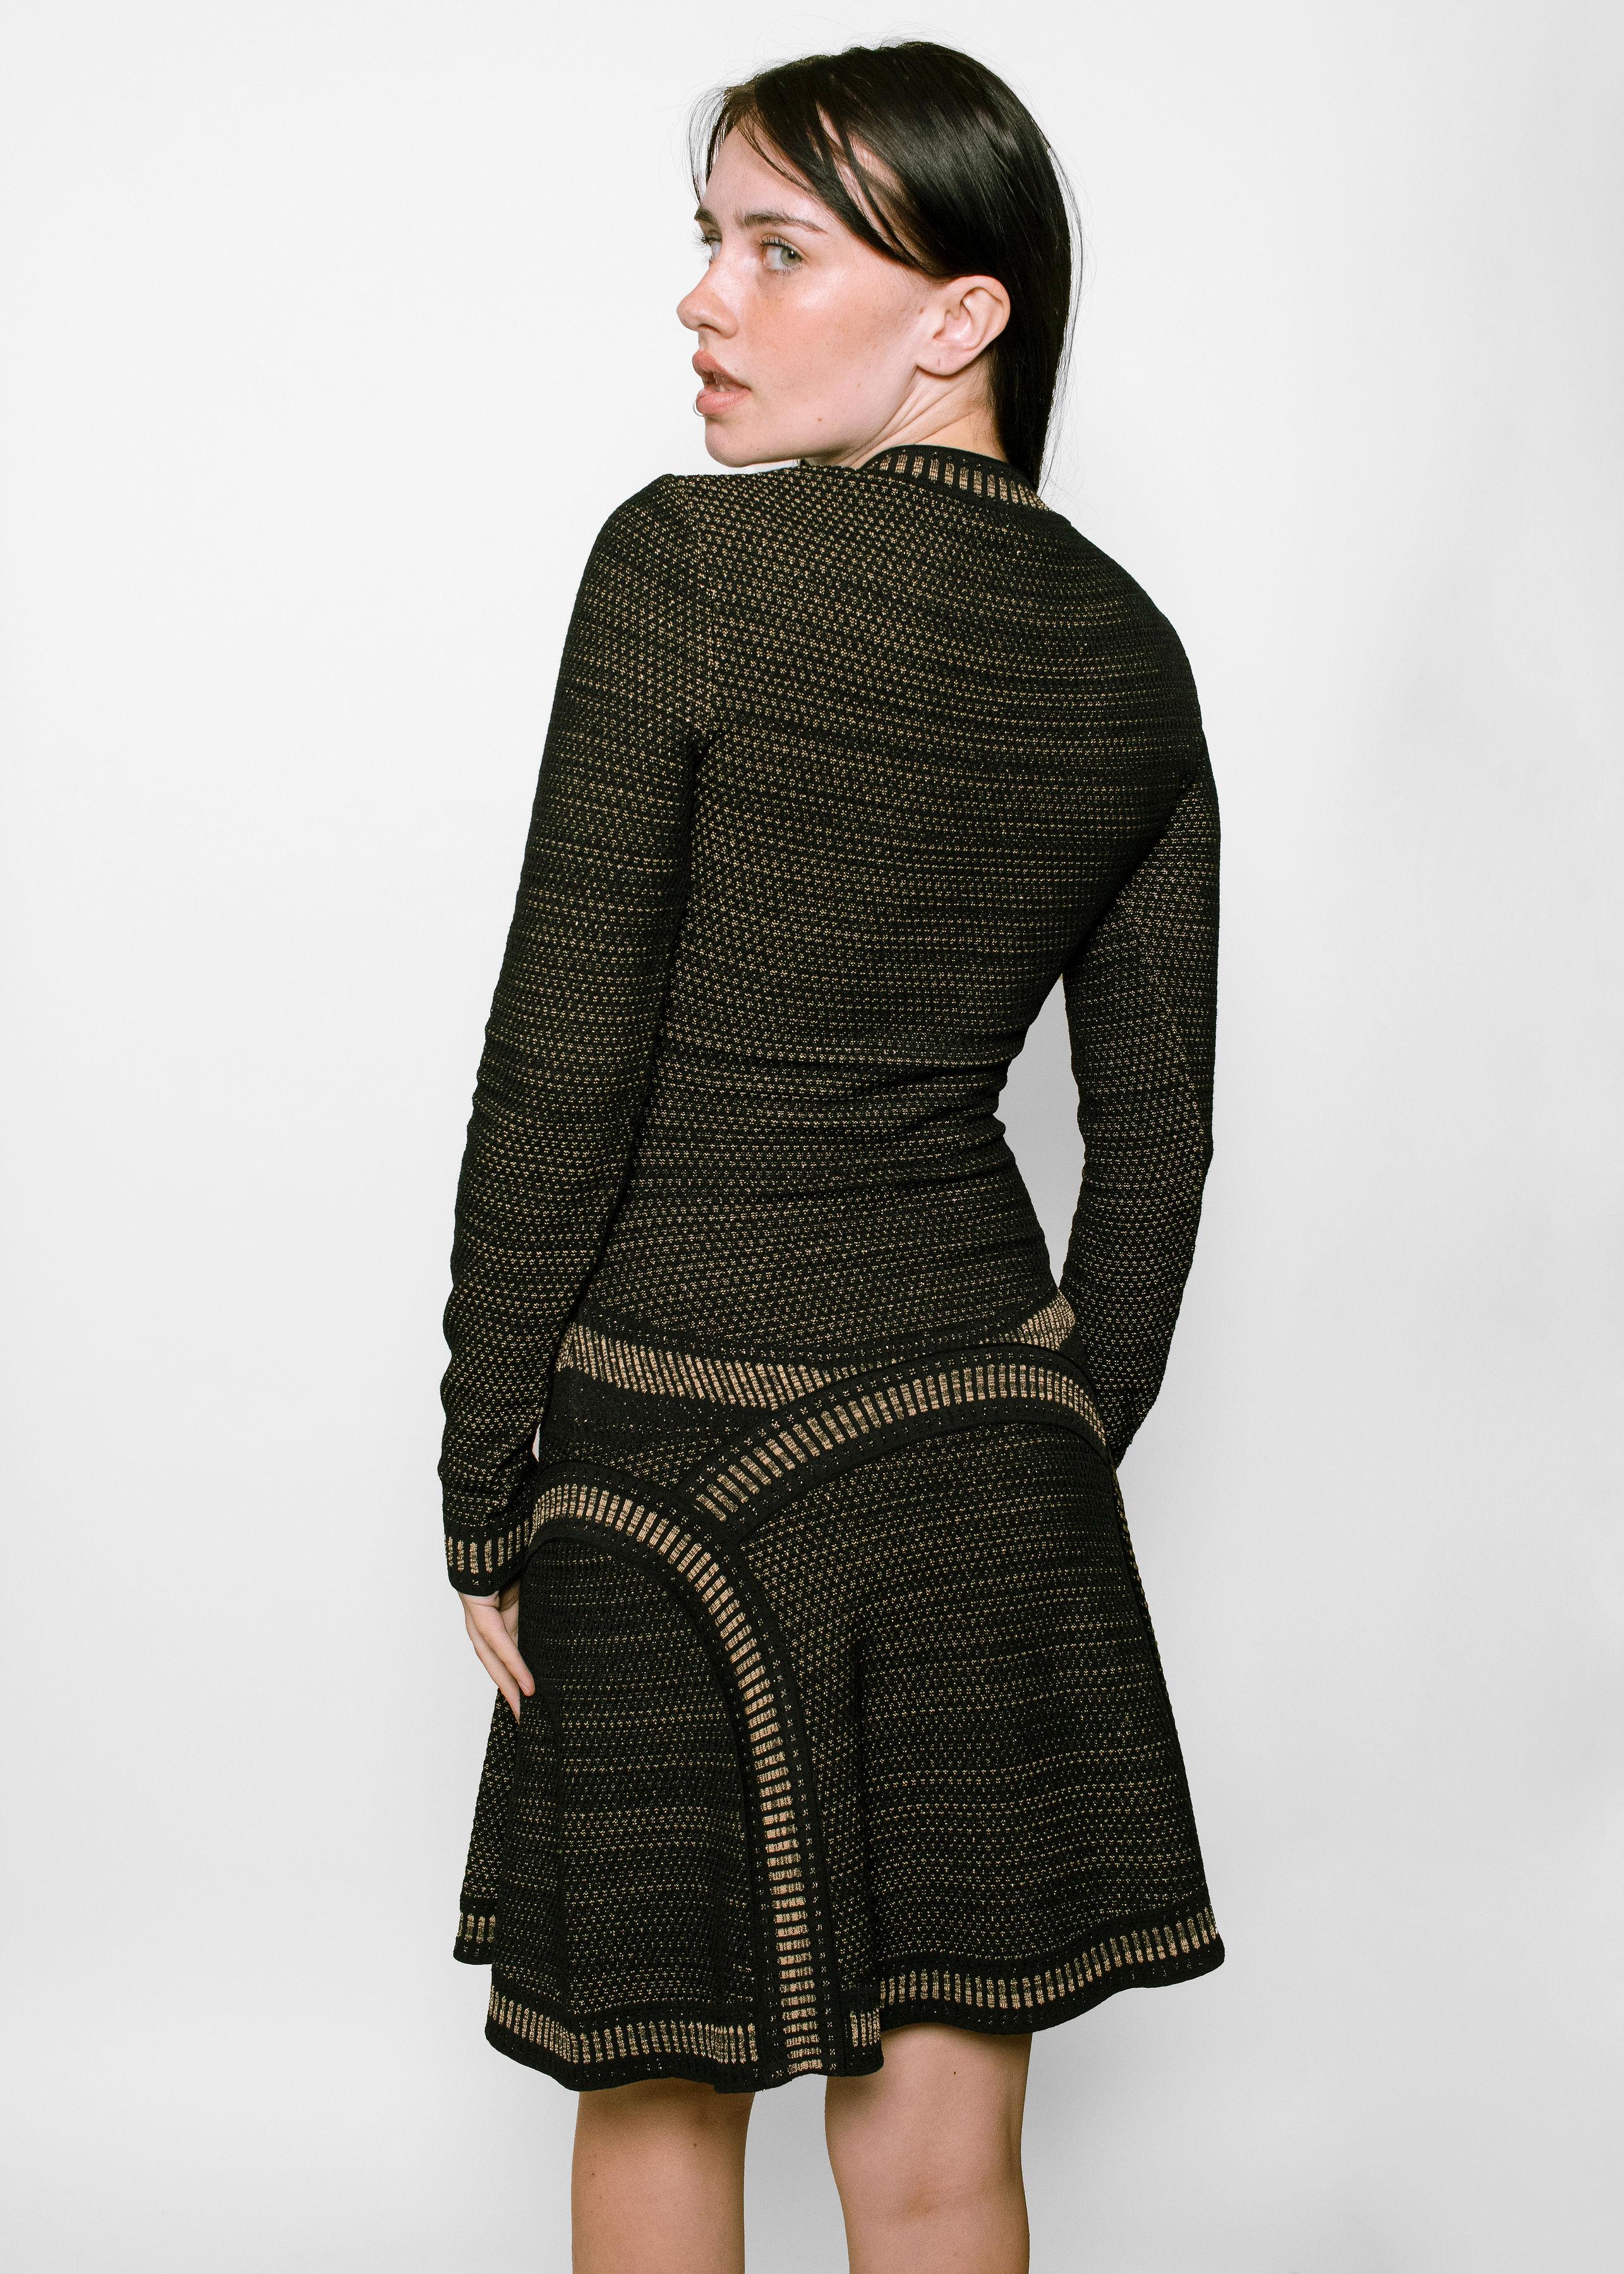 Roberto Cavalli Black and Gold Knit Dress In Excellent Condition In Los Angeles, CA